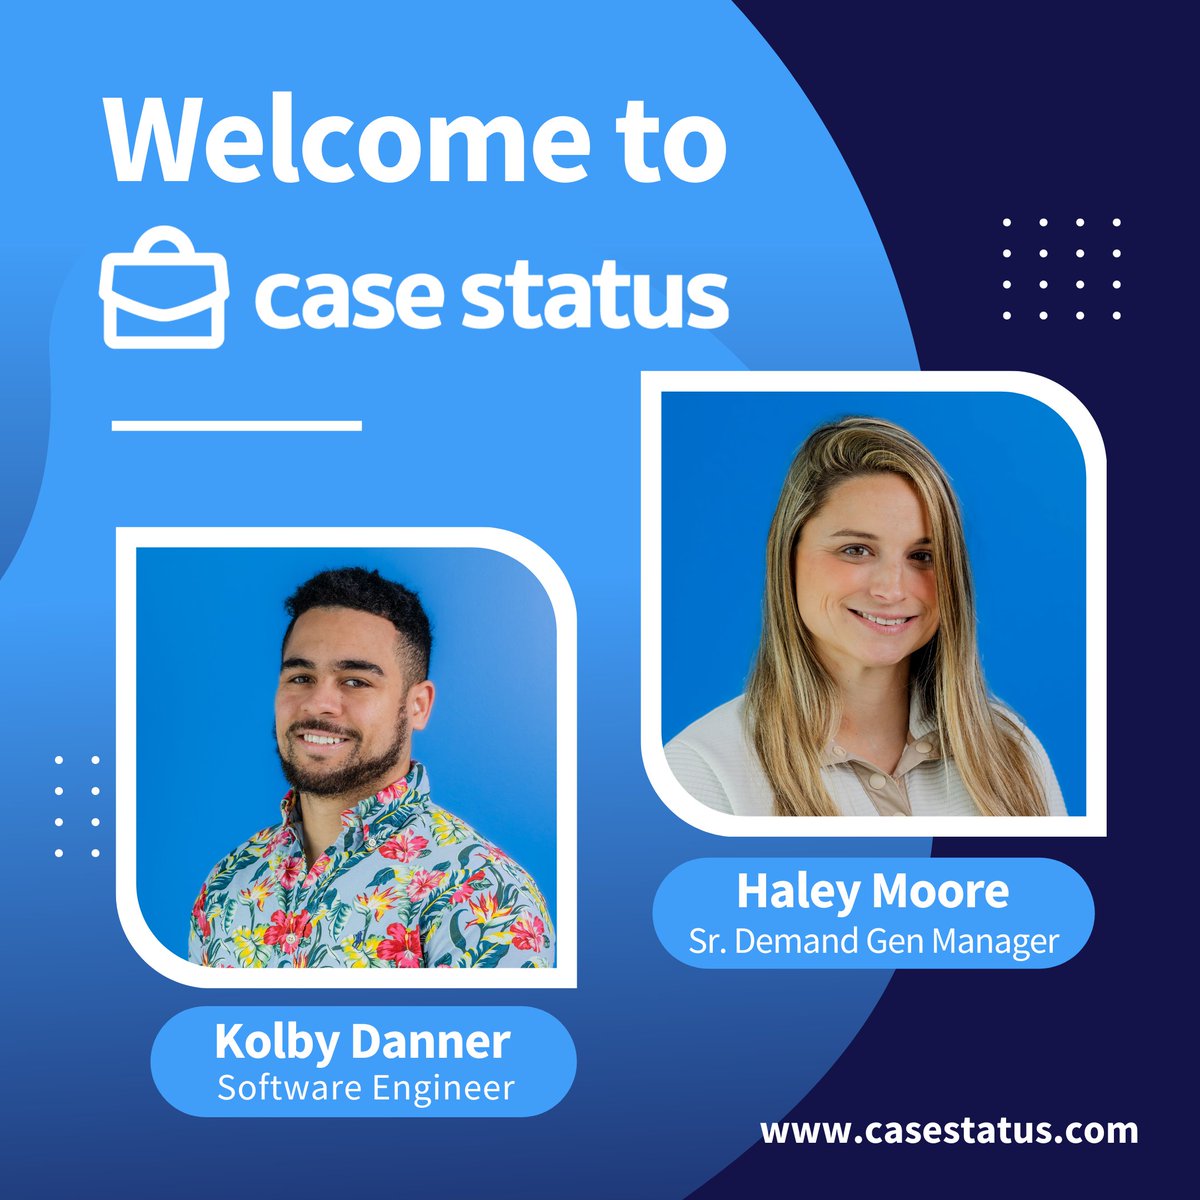 Please welcome the newest members of the Case Status team, Kolby and Haley! 🎉

#CaseStatus #LegalTech #LegalTechnology #WelcomeAboard #CaseStatusTeam #NewBeginnings #InnovationLeaders #TechTalent #GrowthJourney #TeamExpansion #Welcometotheteam